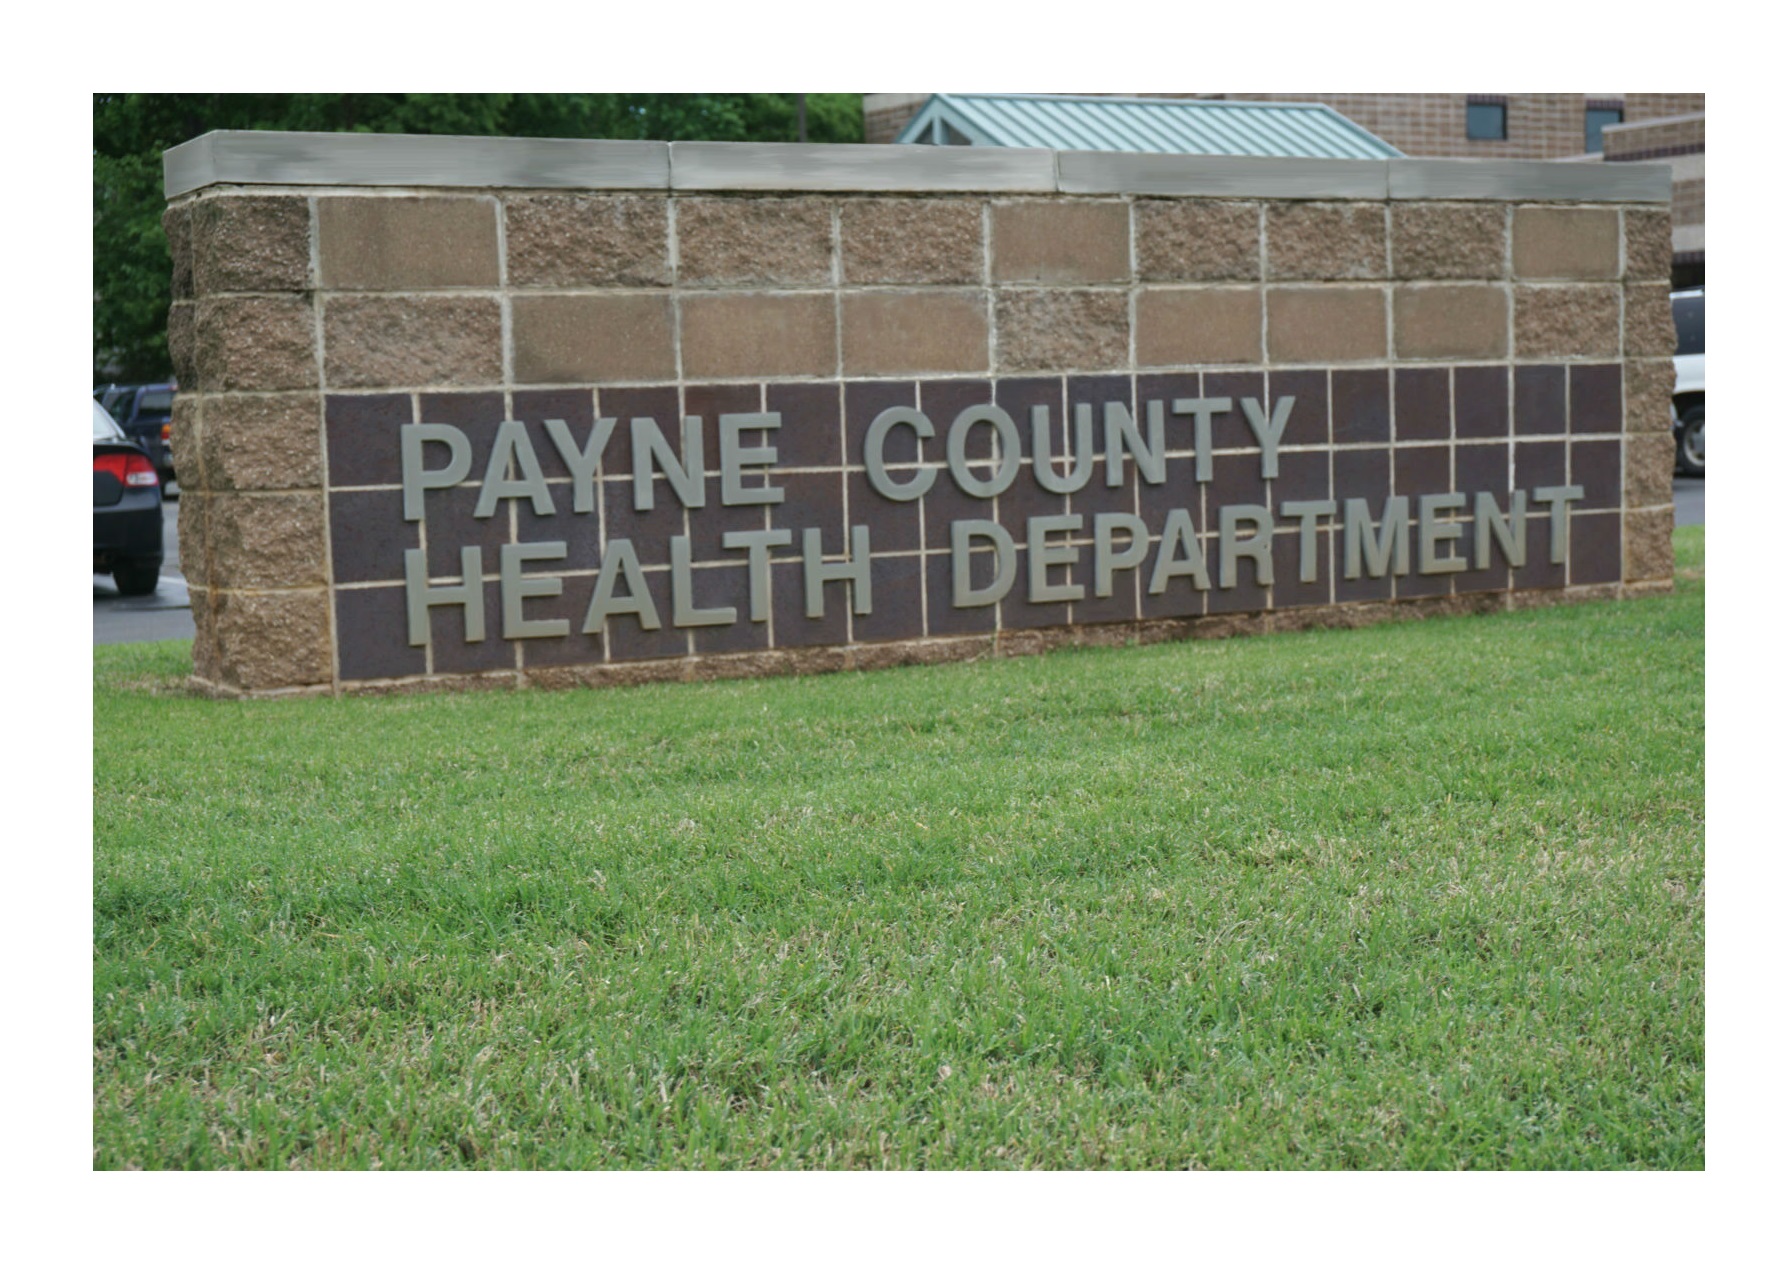 Payne County Health Department Sign